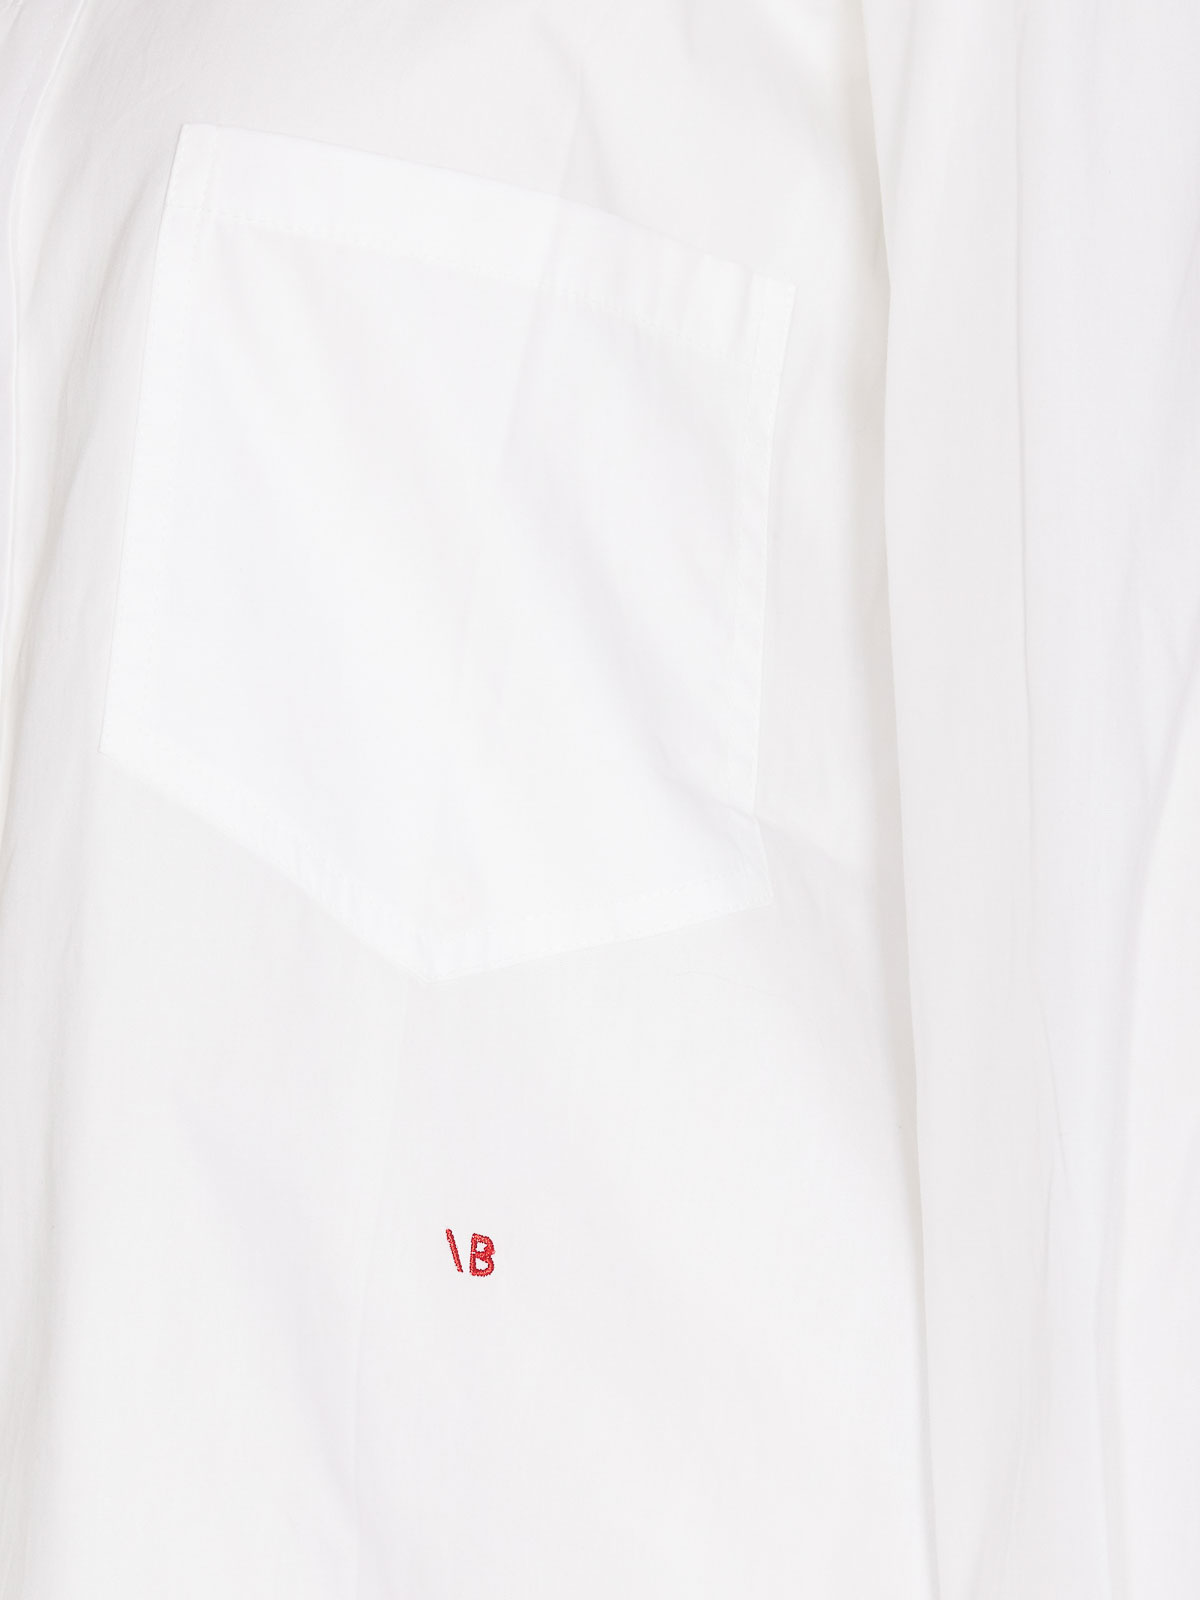 Shop Victoria Beckham White Shirt With Al Buttons Embroidered